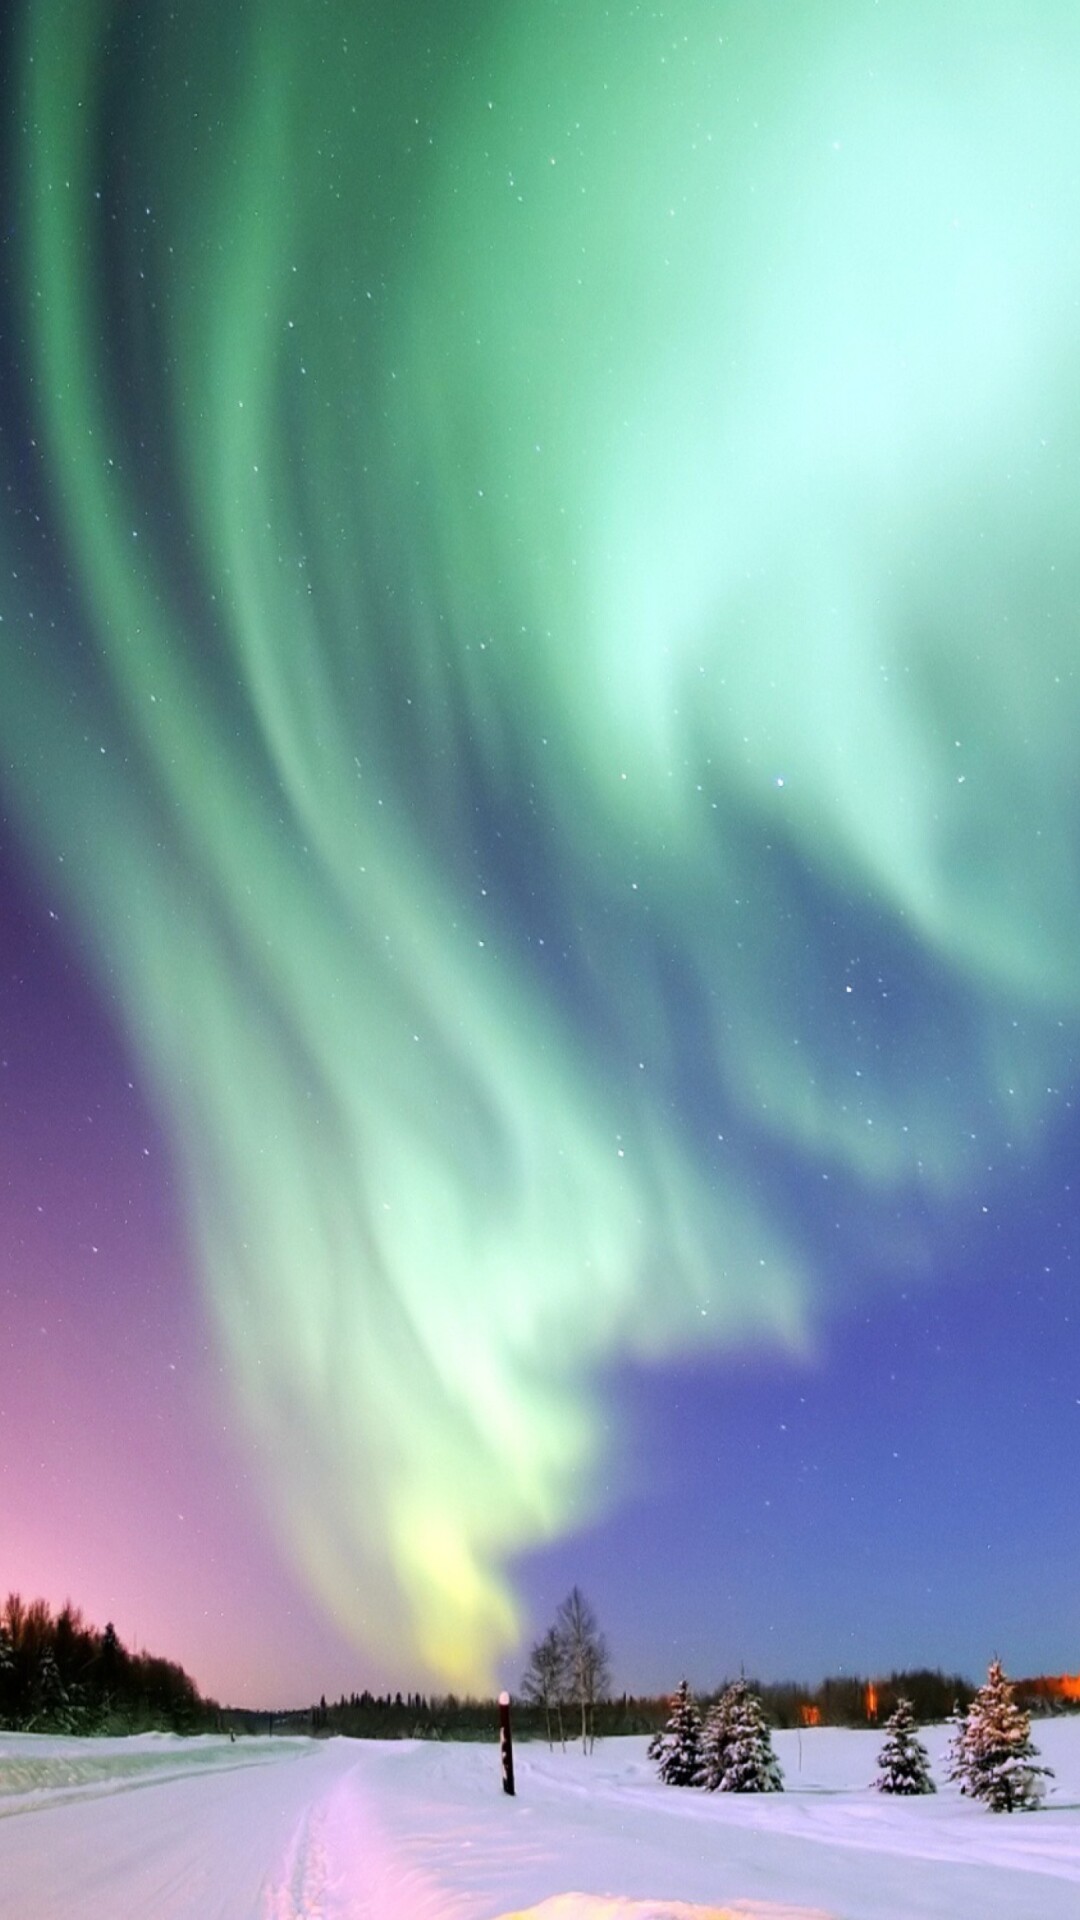 Aurora Borealis: Light display in the sky that is caused by particles from the sun interacting with Earth’s magnetic field. 1080x1920 Full HD Wallpaper.